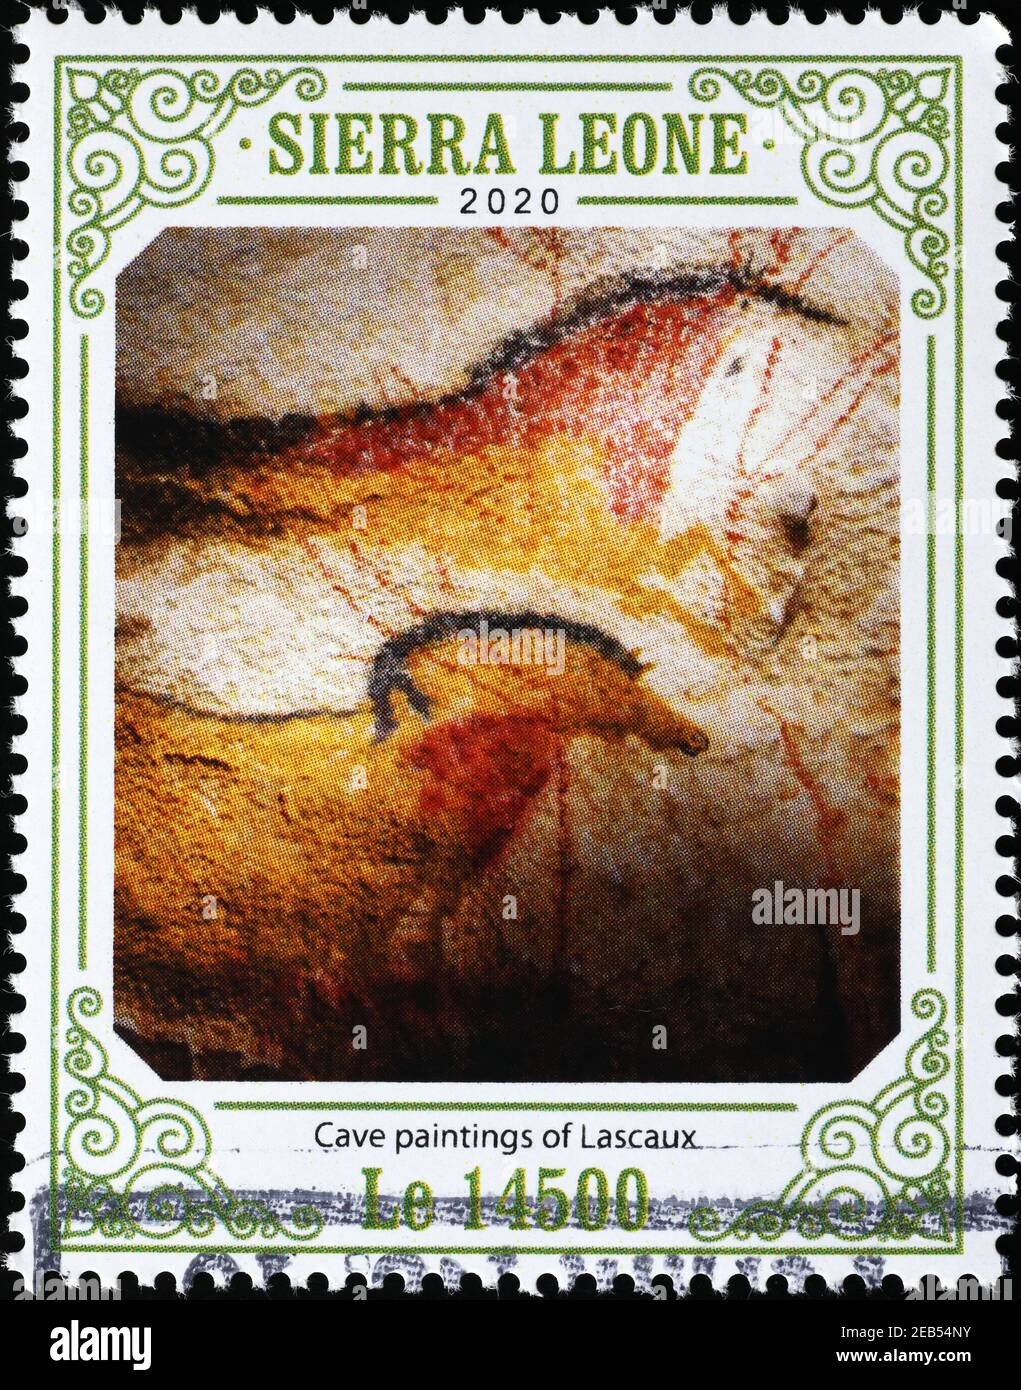 Horses in cave paintings of Lascaux on postage stamp Stock Photo